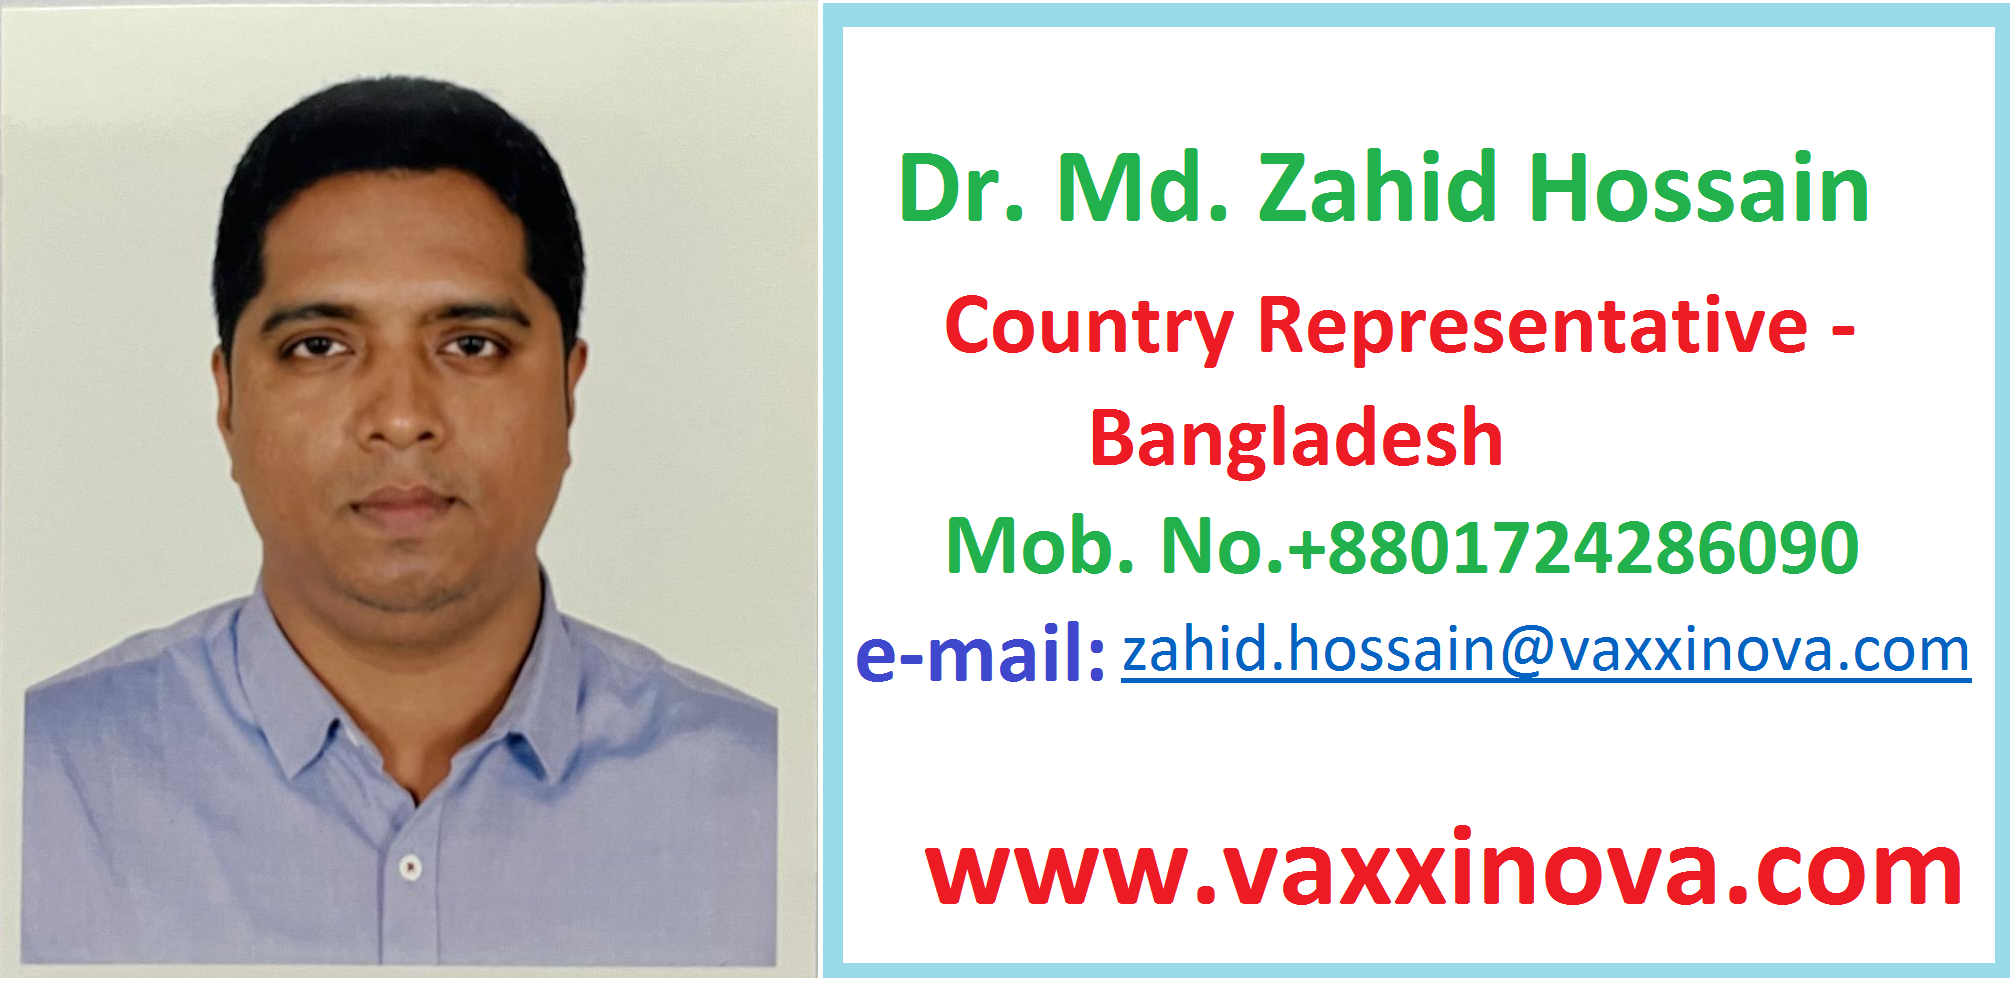 Vaxxinova Welcomes Dr. Zahid Hossain as it’s Country Representative in Bangladesh